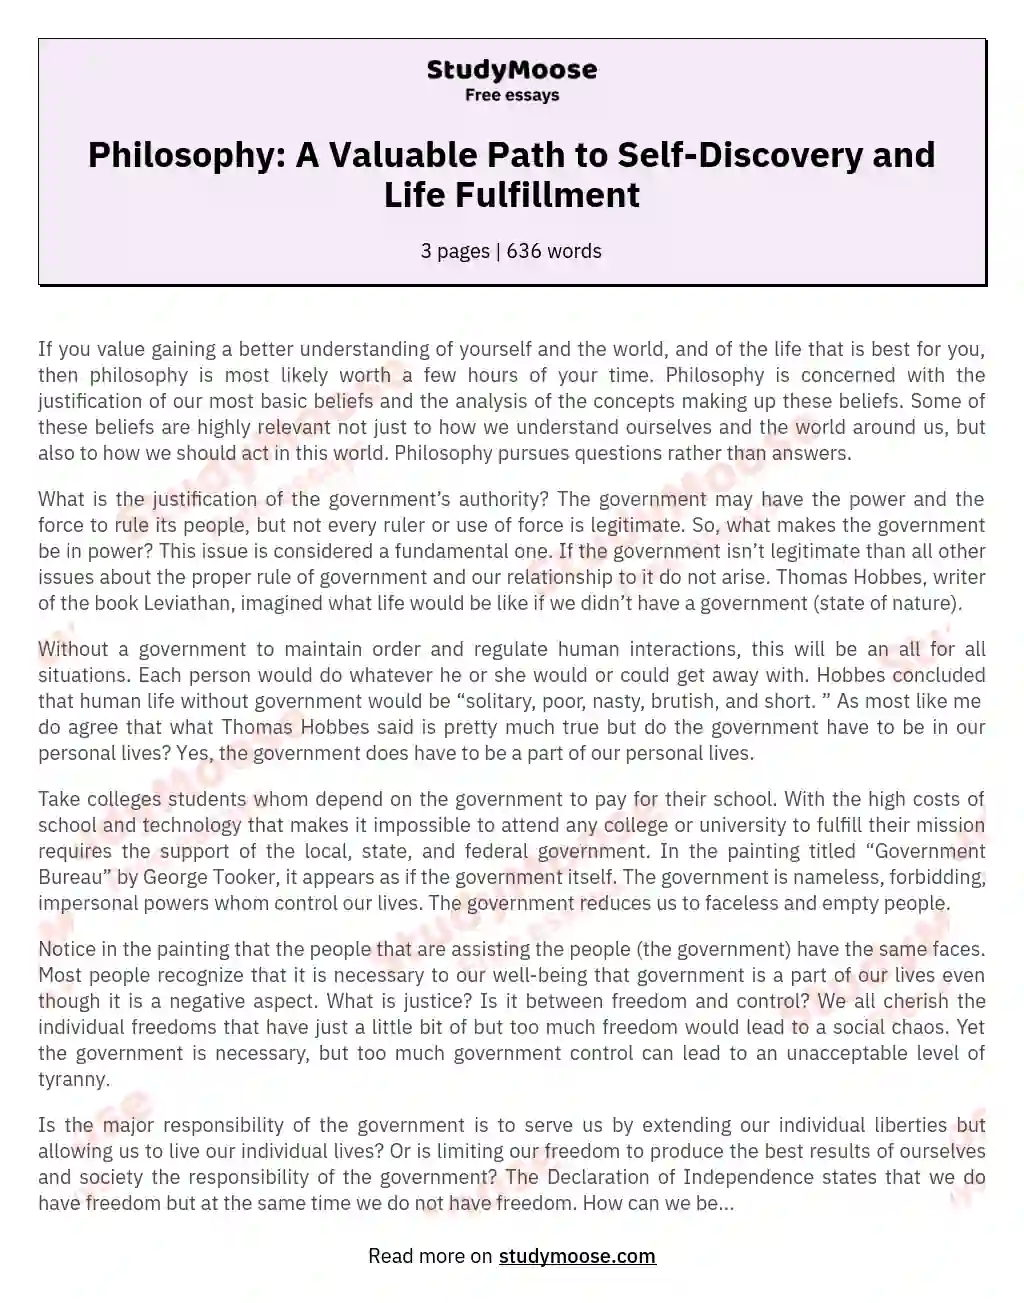 Philosophy: A Valuable Path to Self-Discovery and Life Fulfillment essay